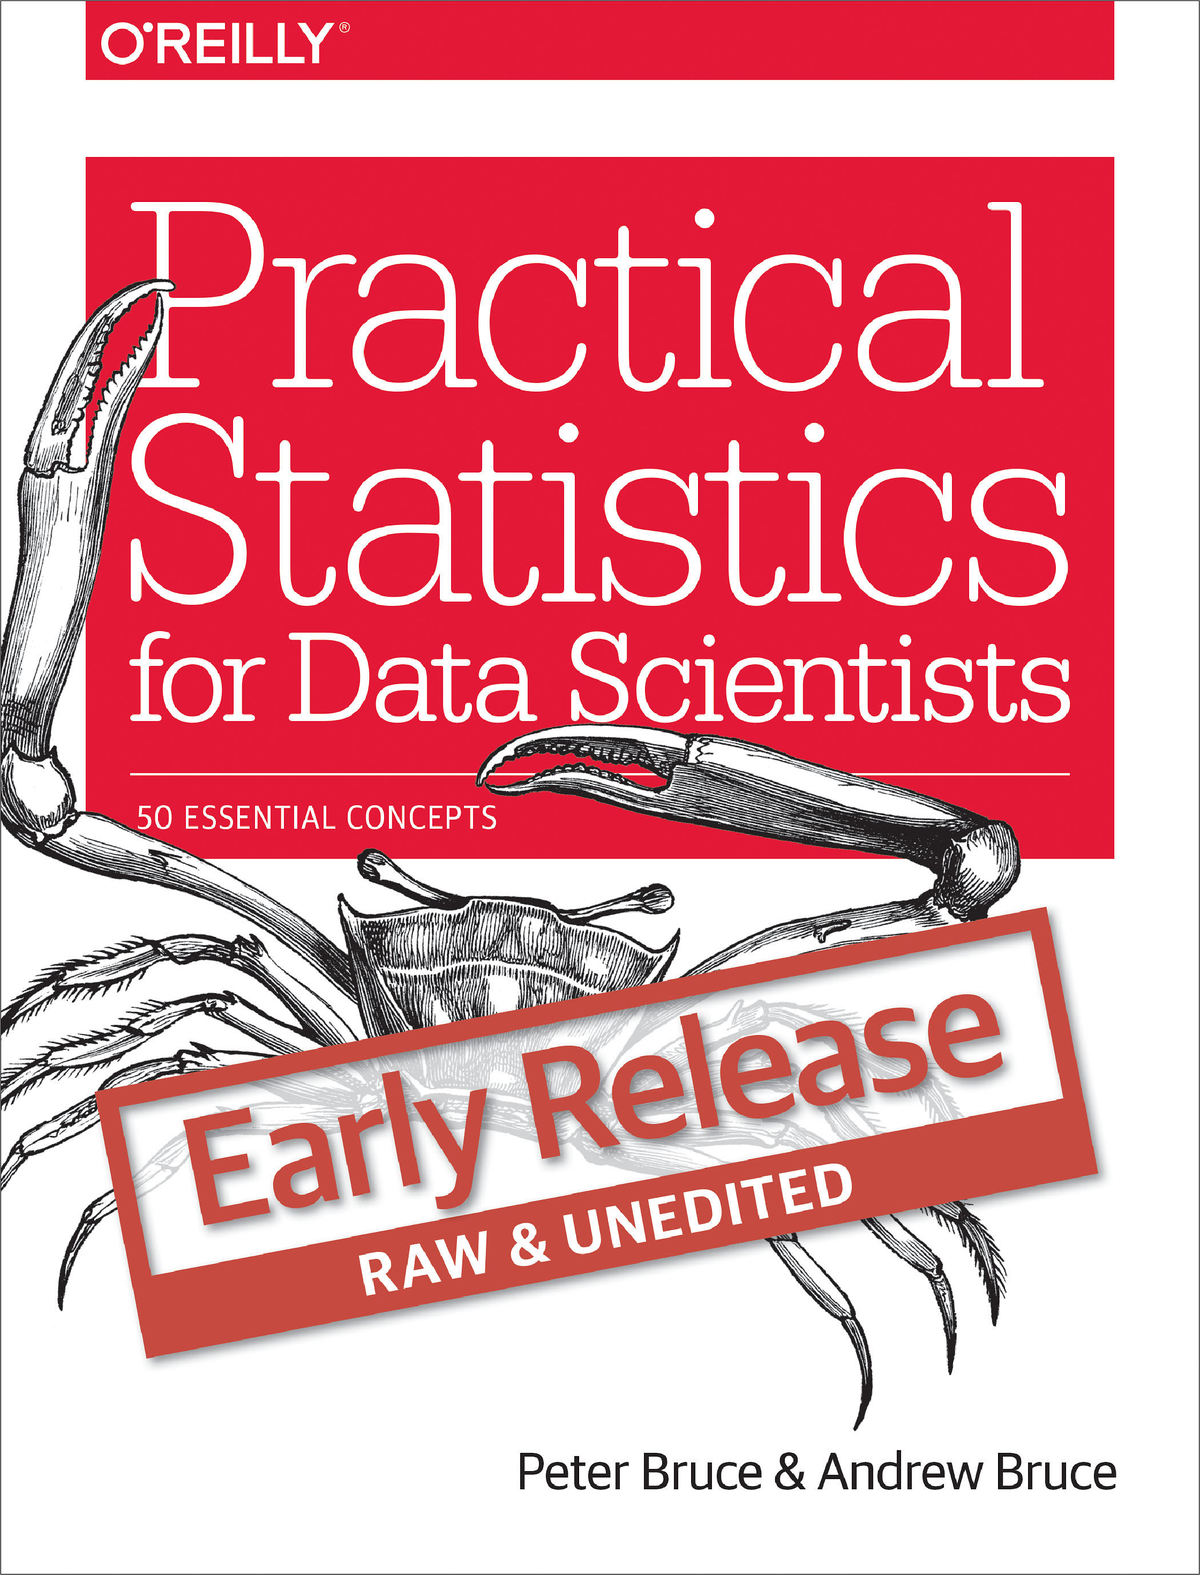 Practical Statistics For Data Scientists 50 Essential Concepts Pdfdrive 978 1 491 95289 4336